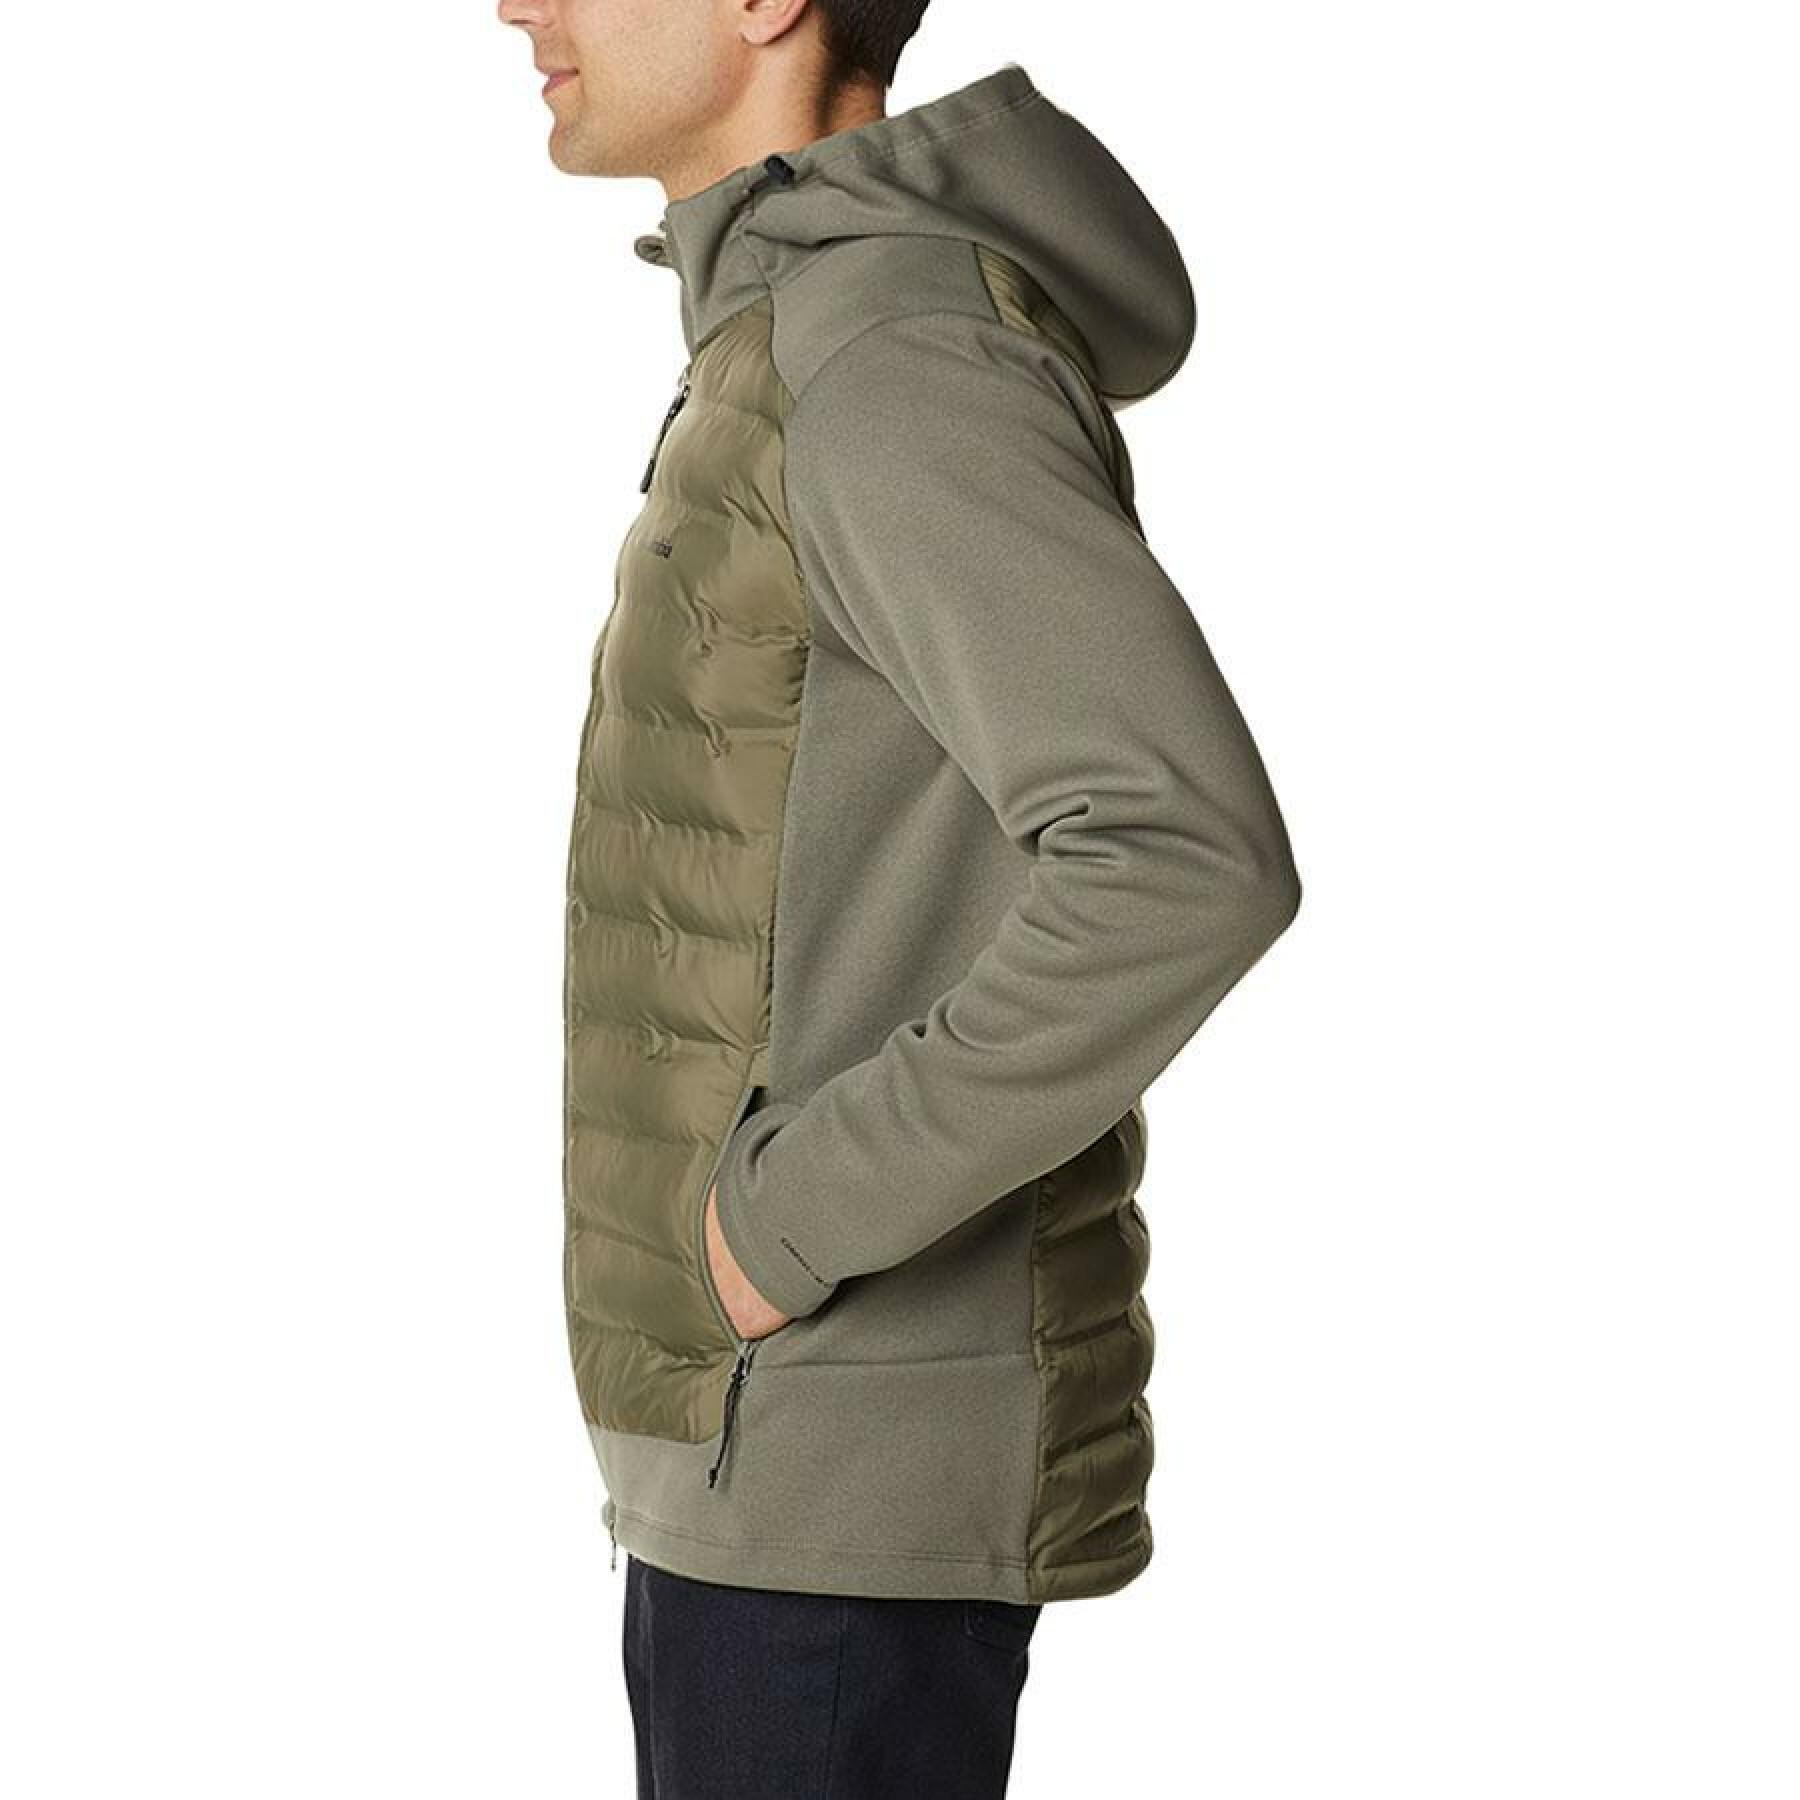 Hoodie Columbia Out-Shield Insulated FZ